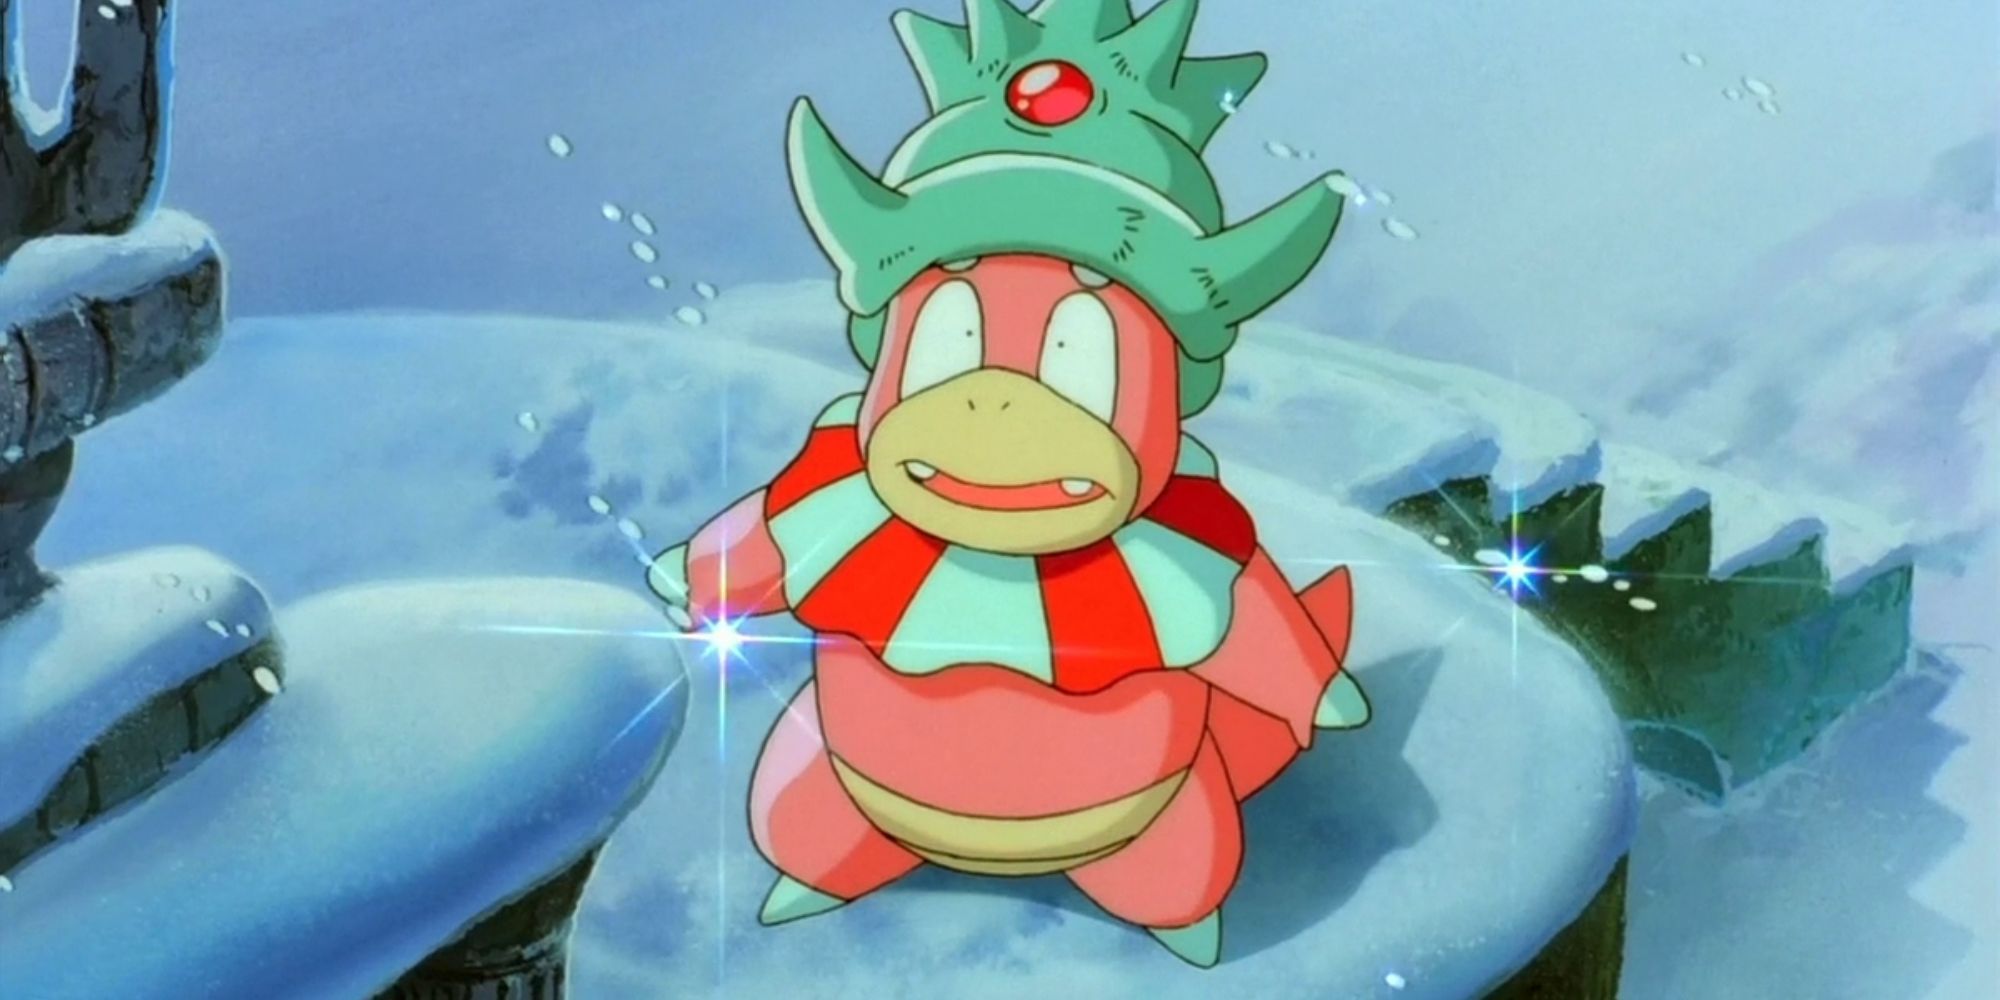 Slowking looks towards the sky while standing on a snowy platform